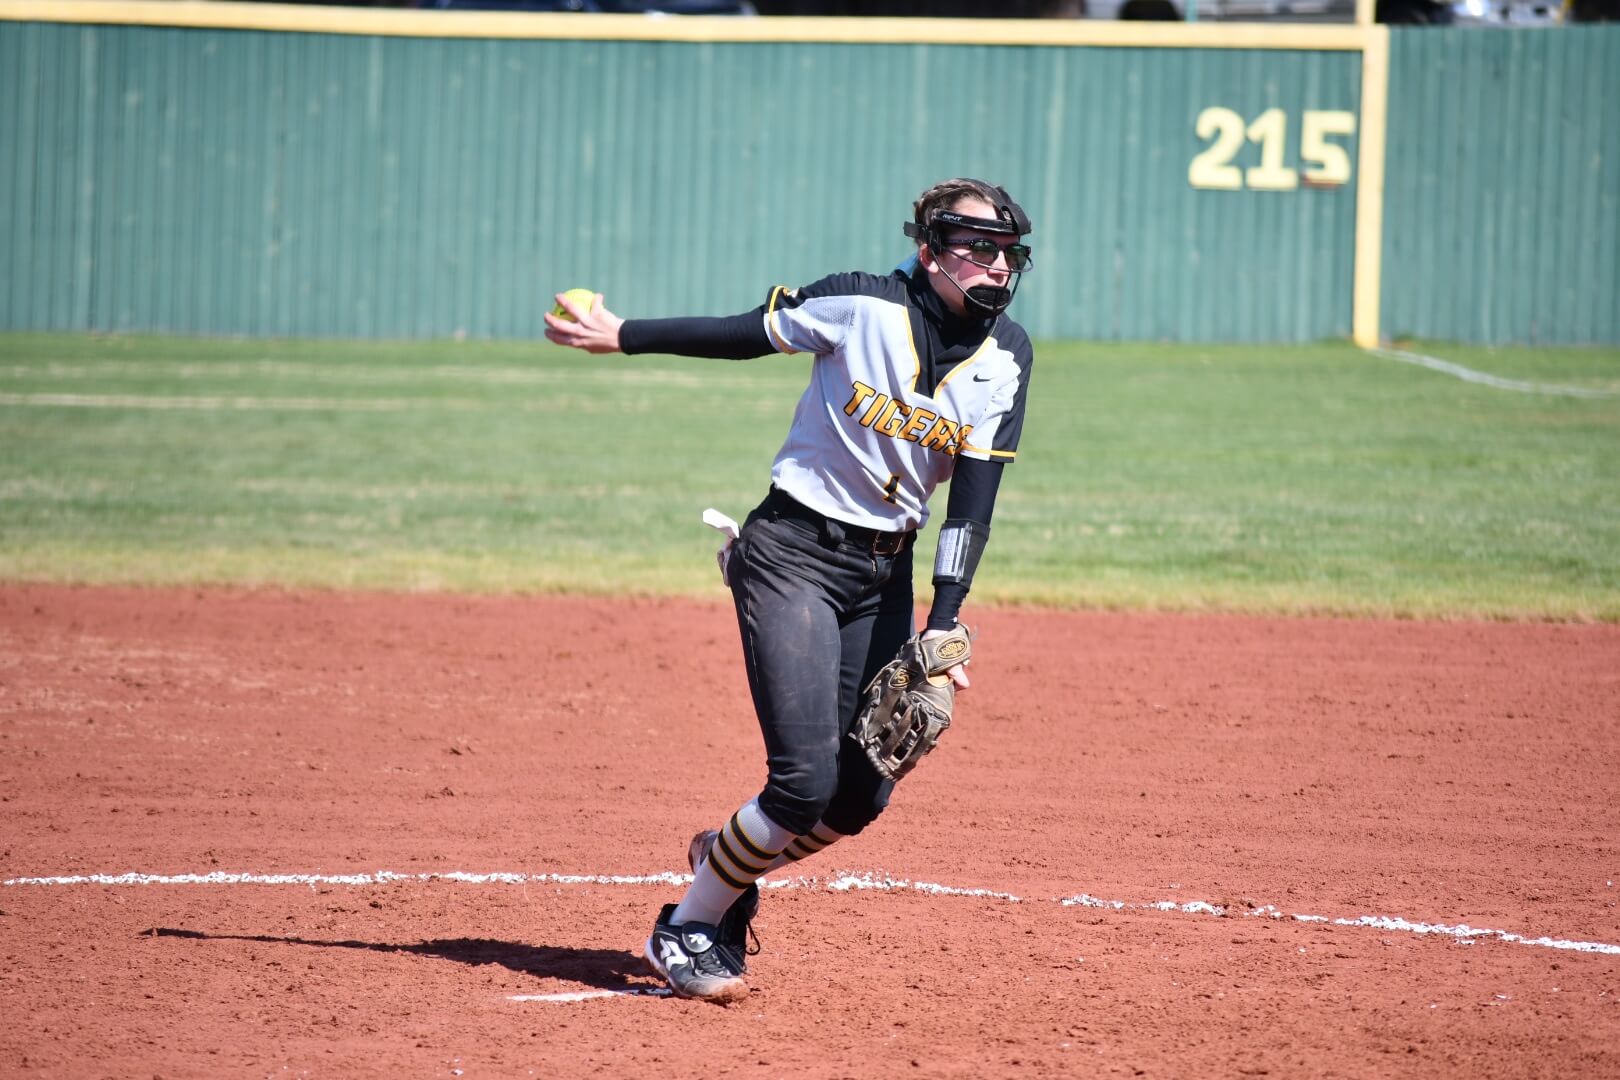 Lady Tigers open season with three big wins as they look to take step forward